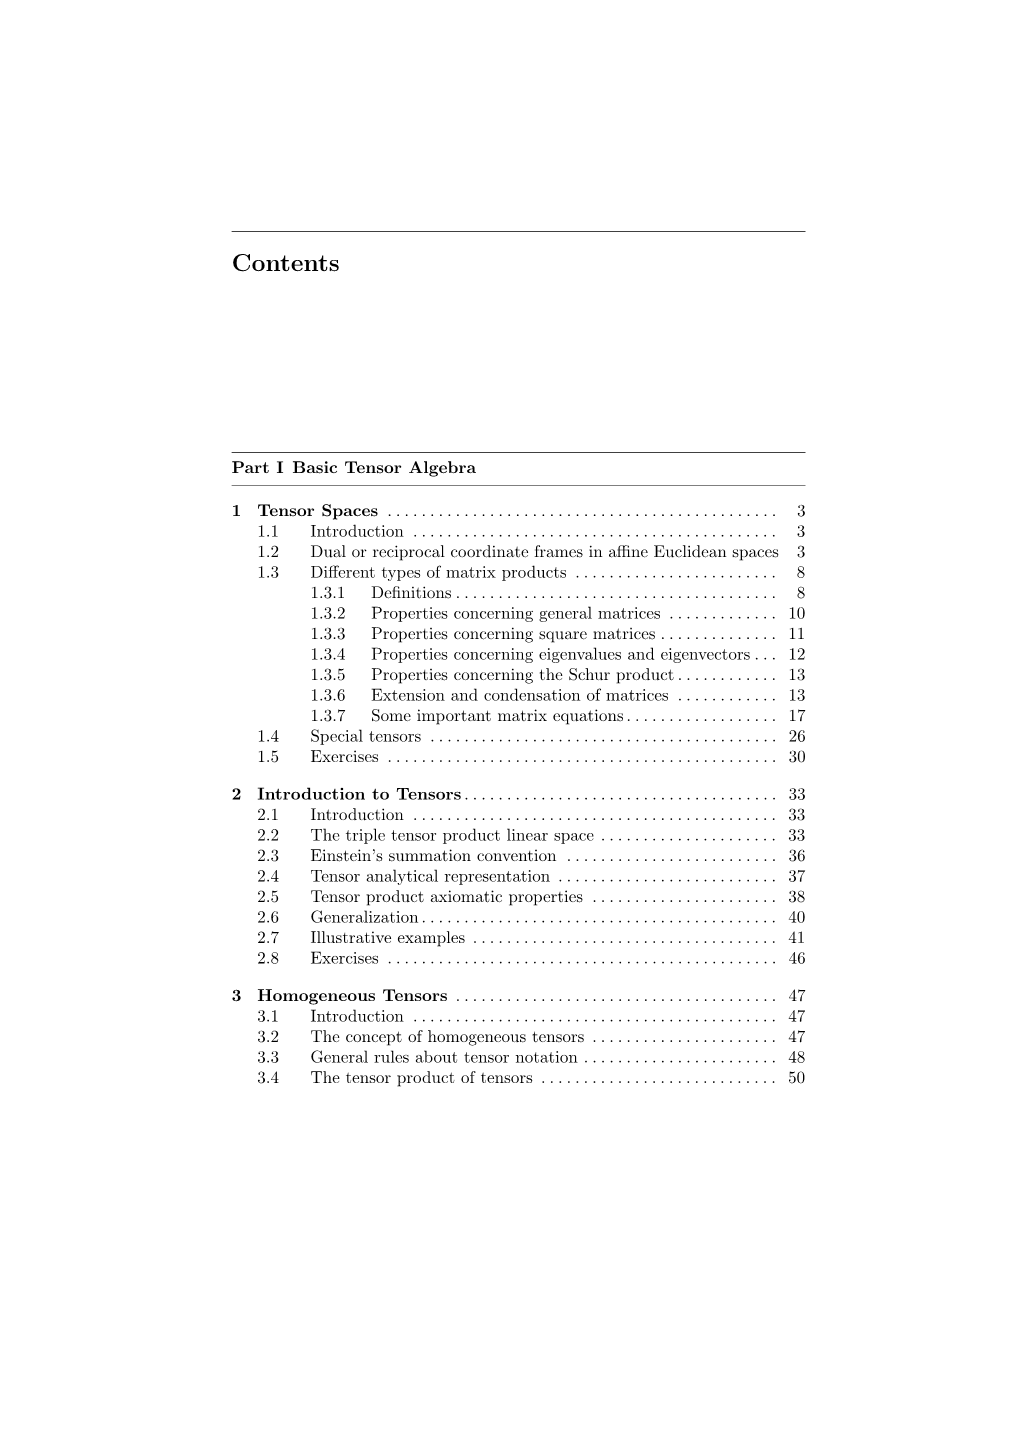 Download a Complete Table of Contents